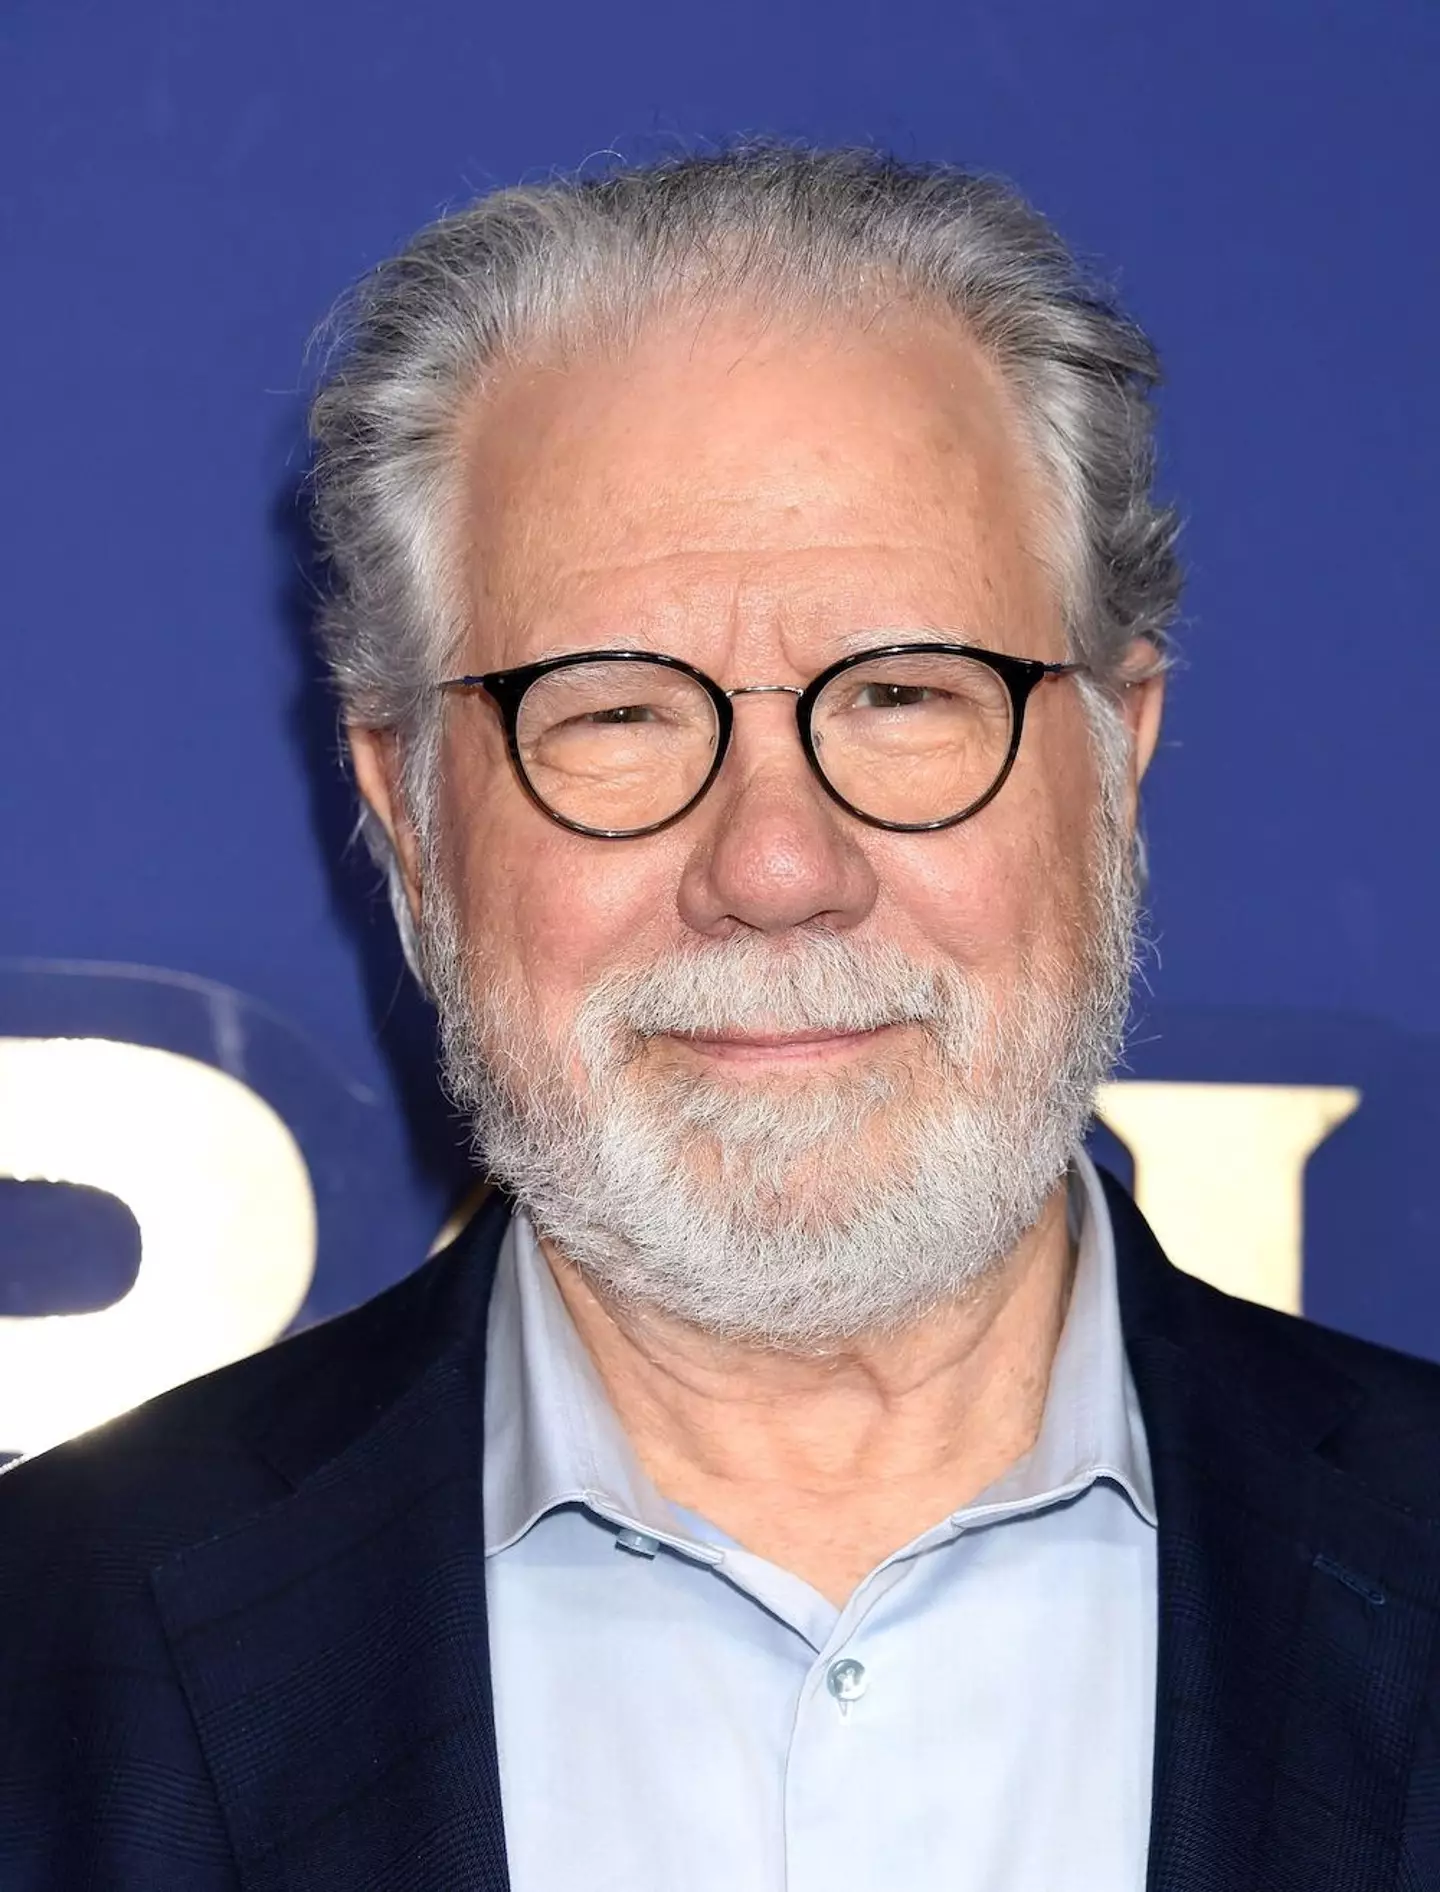 John Larroquette was paid in weed.